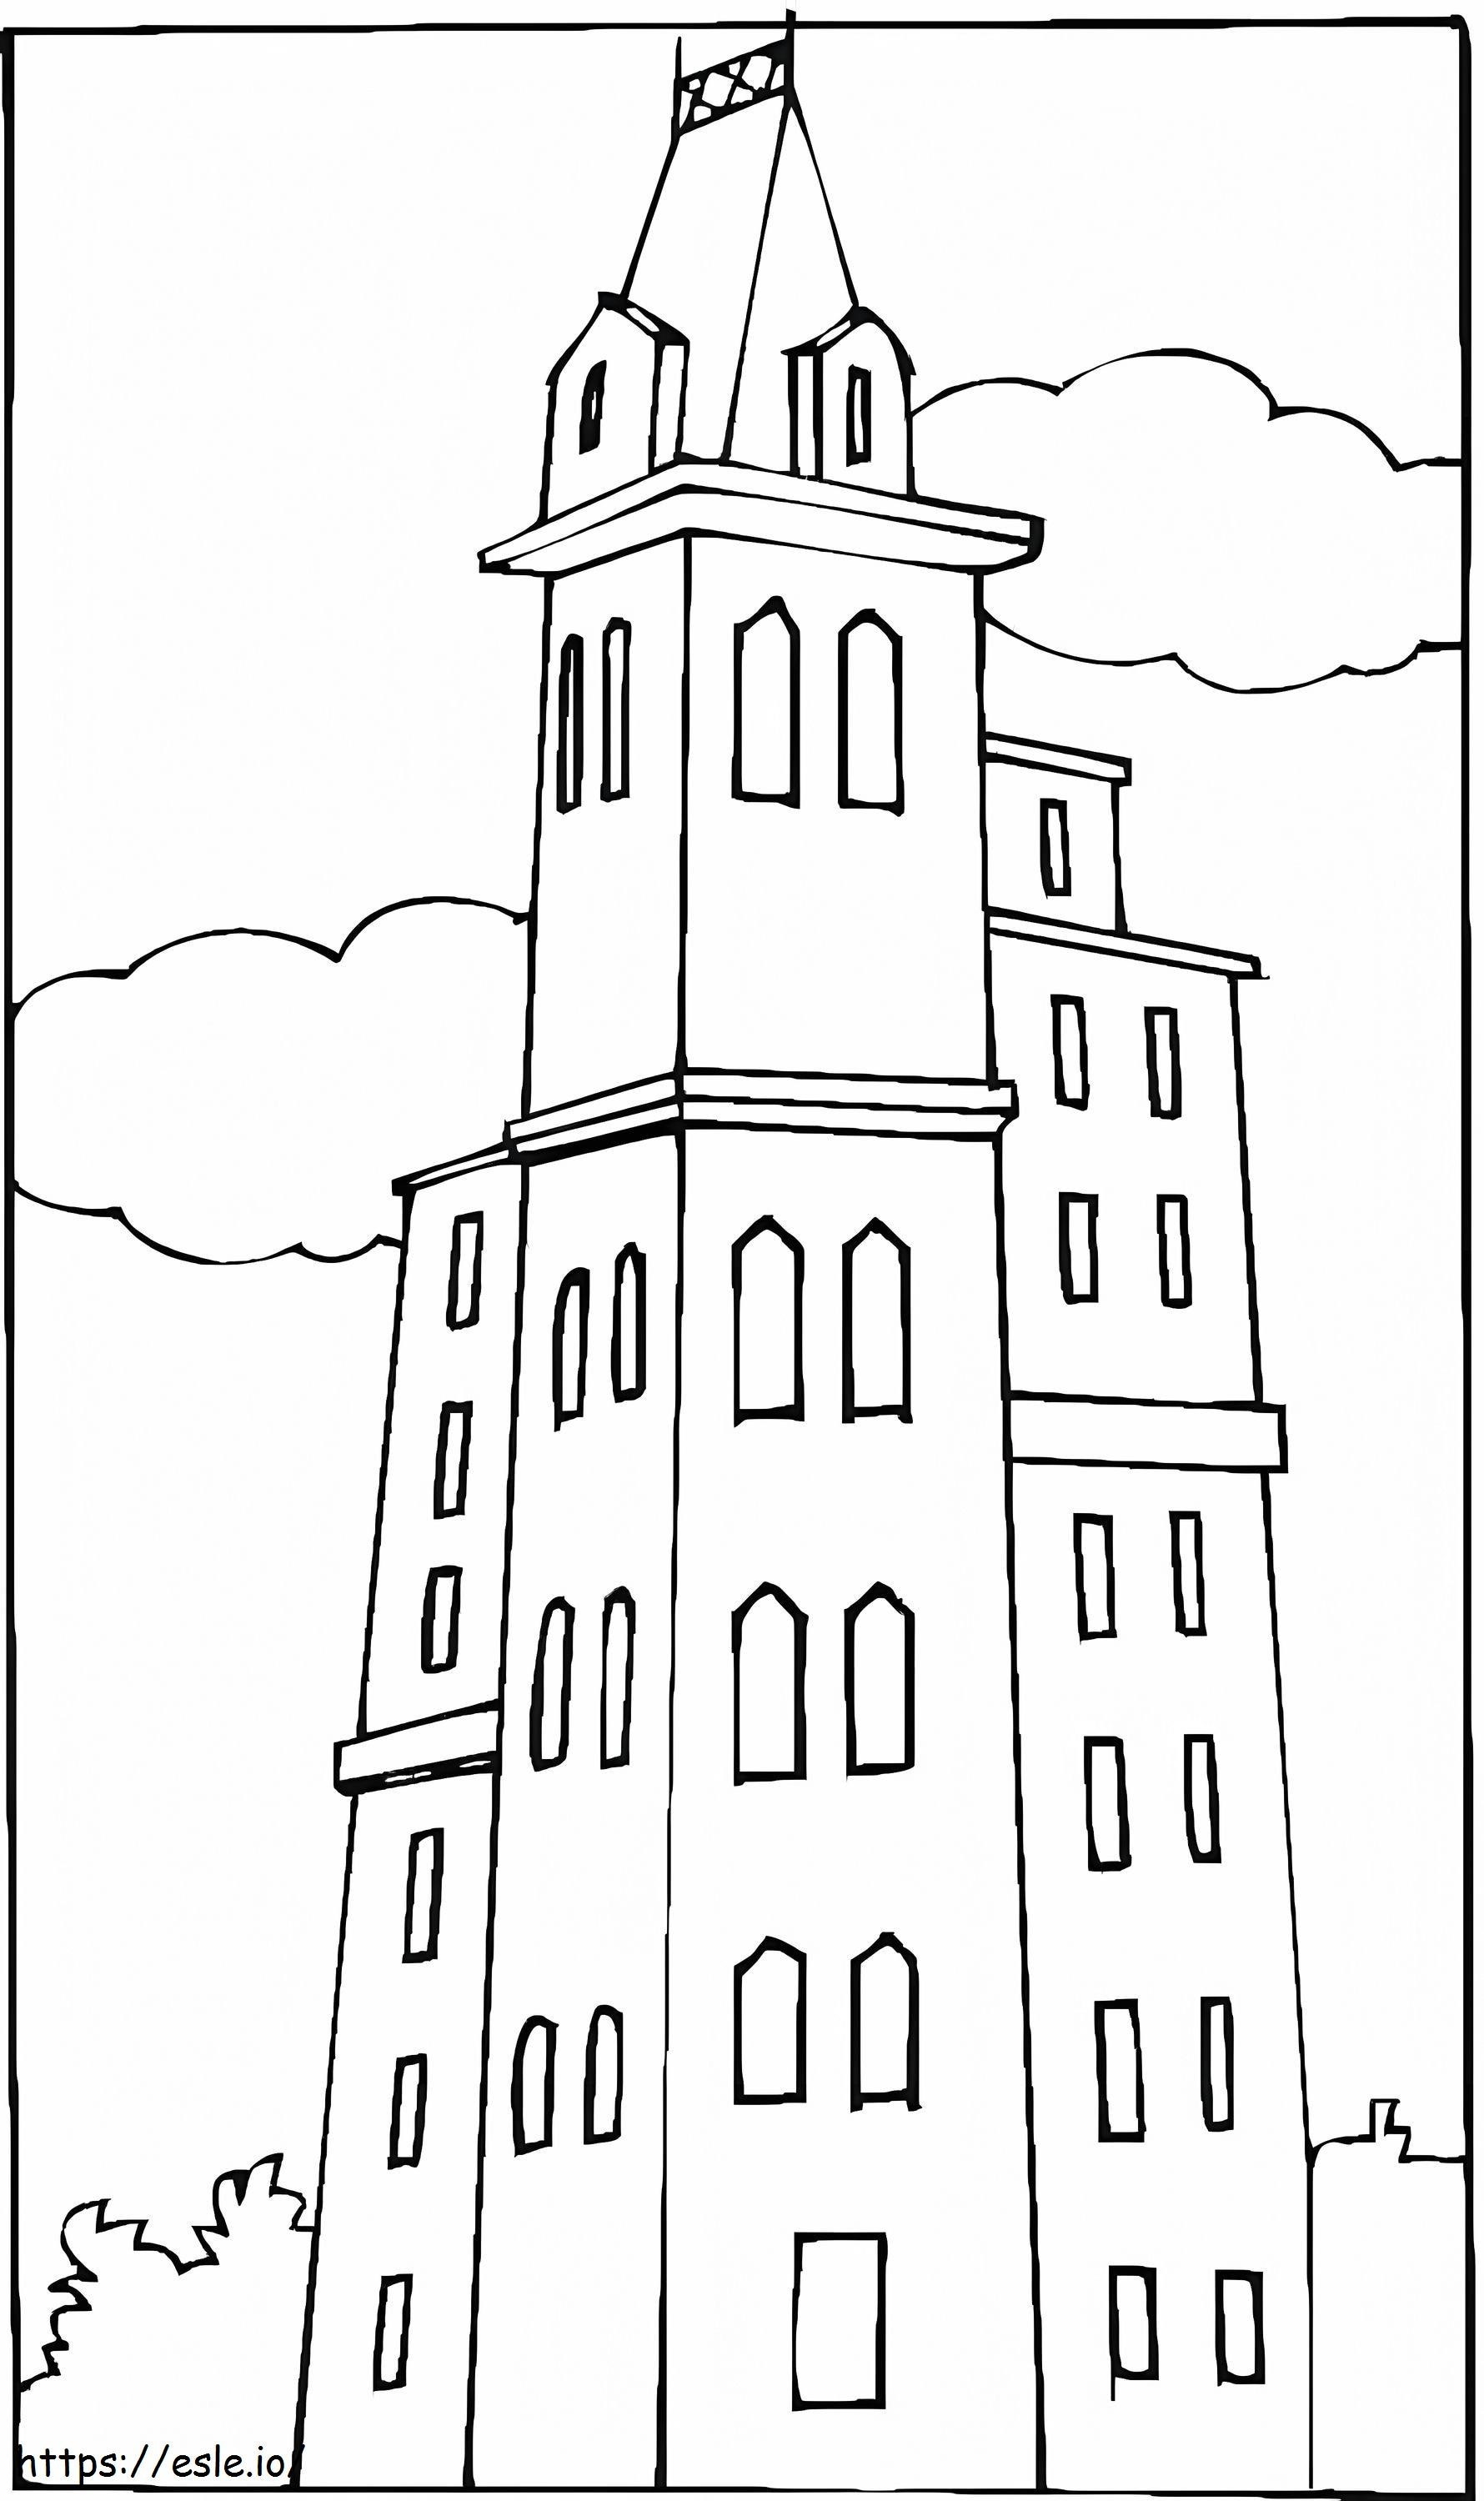 London Penthouses coloring page